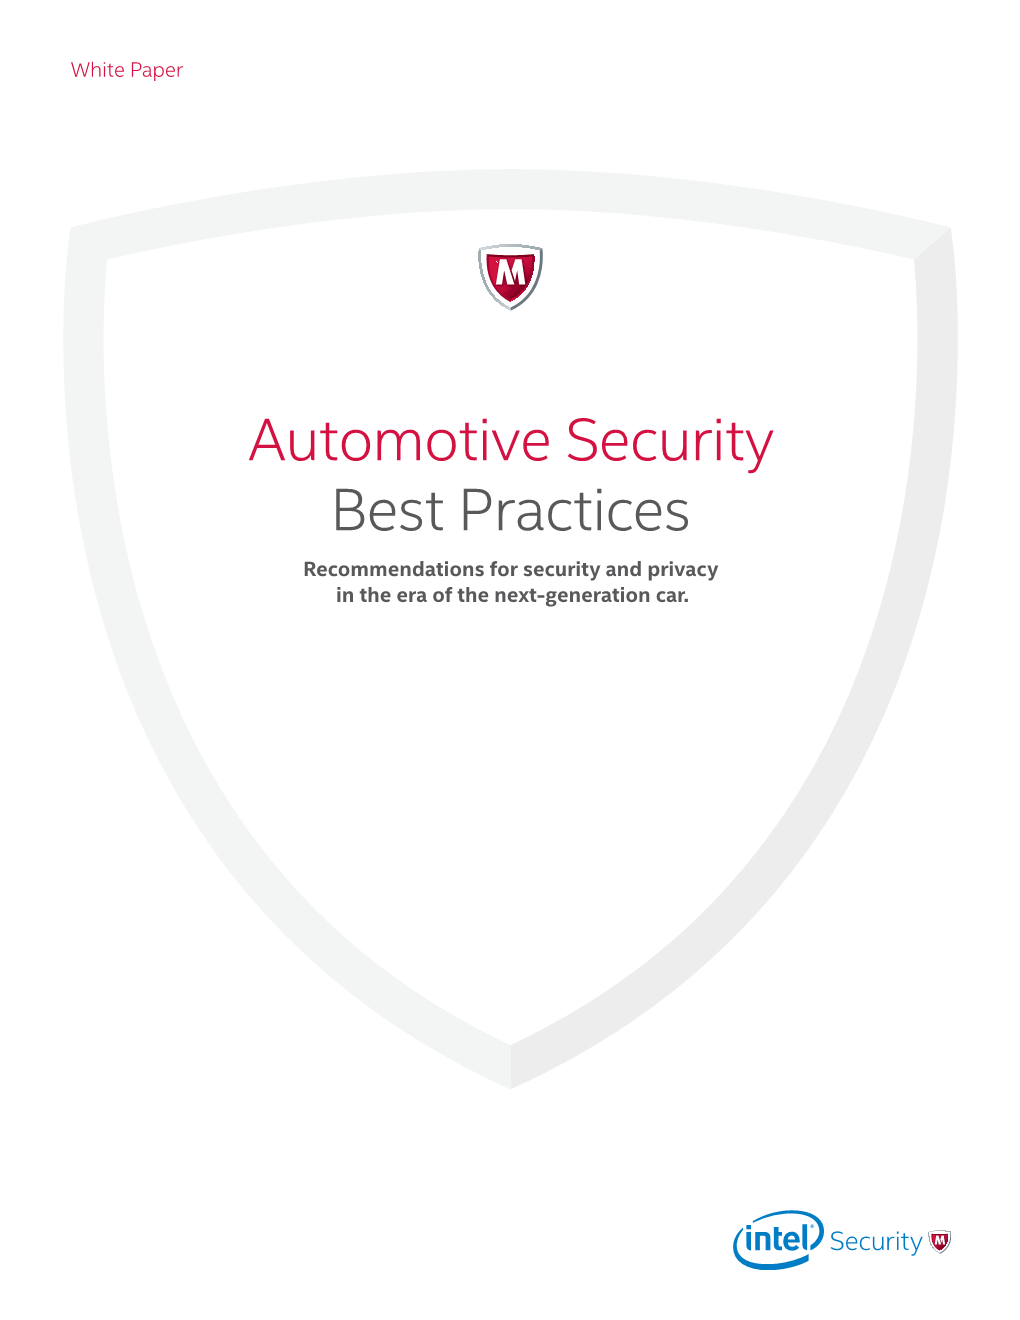 Automotive Security Best Practices Recommendations for Security and Privacy in the Era of the Next-Generation Car